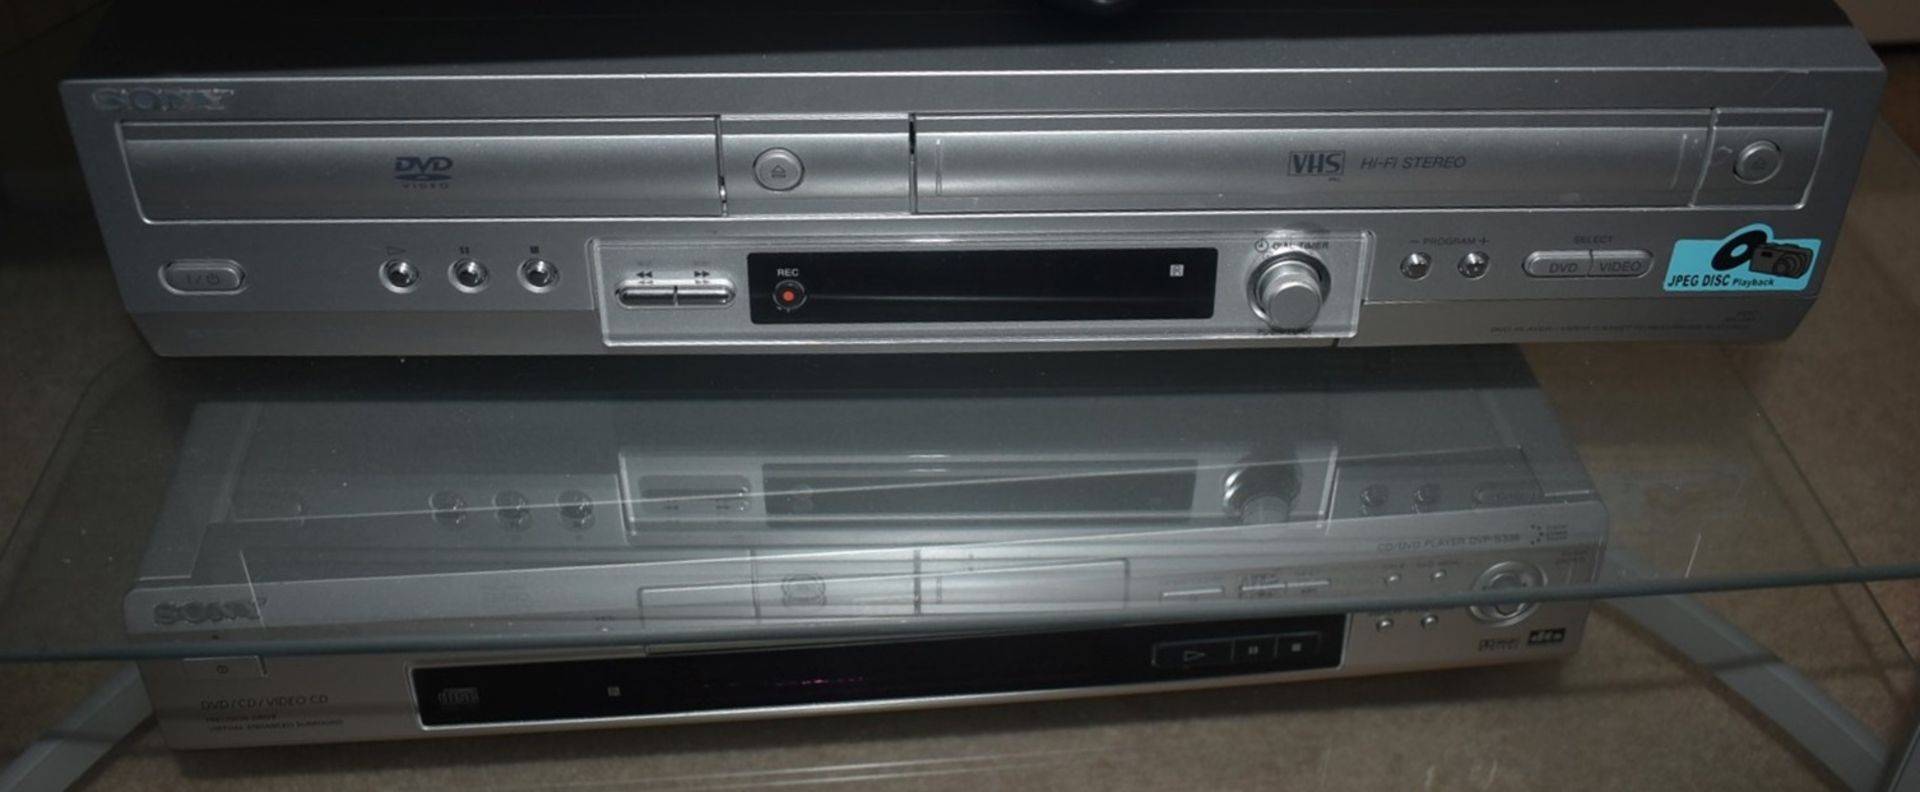 1 x Sony 27" Digital TV On Stand + VHS Video / DVD Player + DVD/CD Player - CL491 *NO VAT* - Image 2 of 5